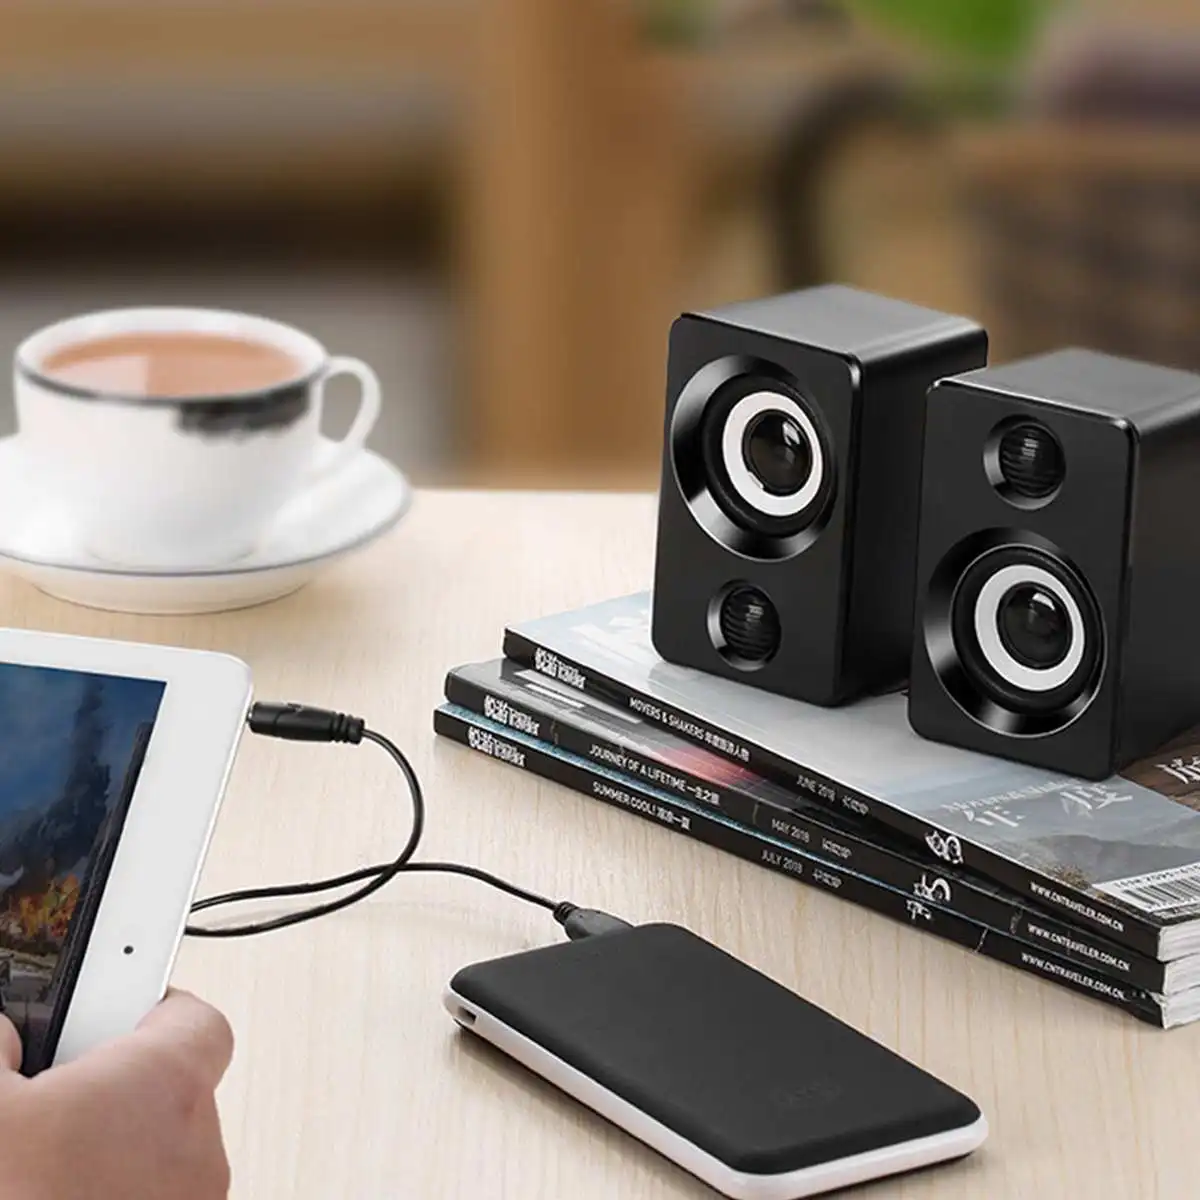 Portable Mini USB 2.1 Bass Speakers Music Stereo for Computer Desktop PC Laptop Notebook Phone Home Theater Party Loudspeaker